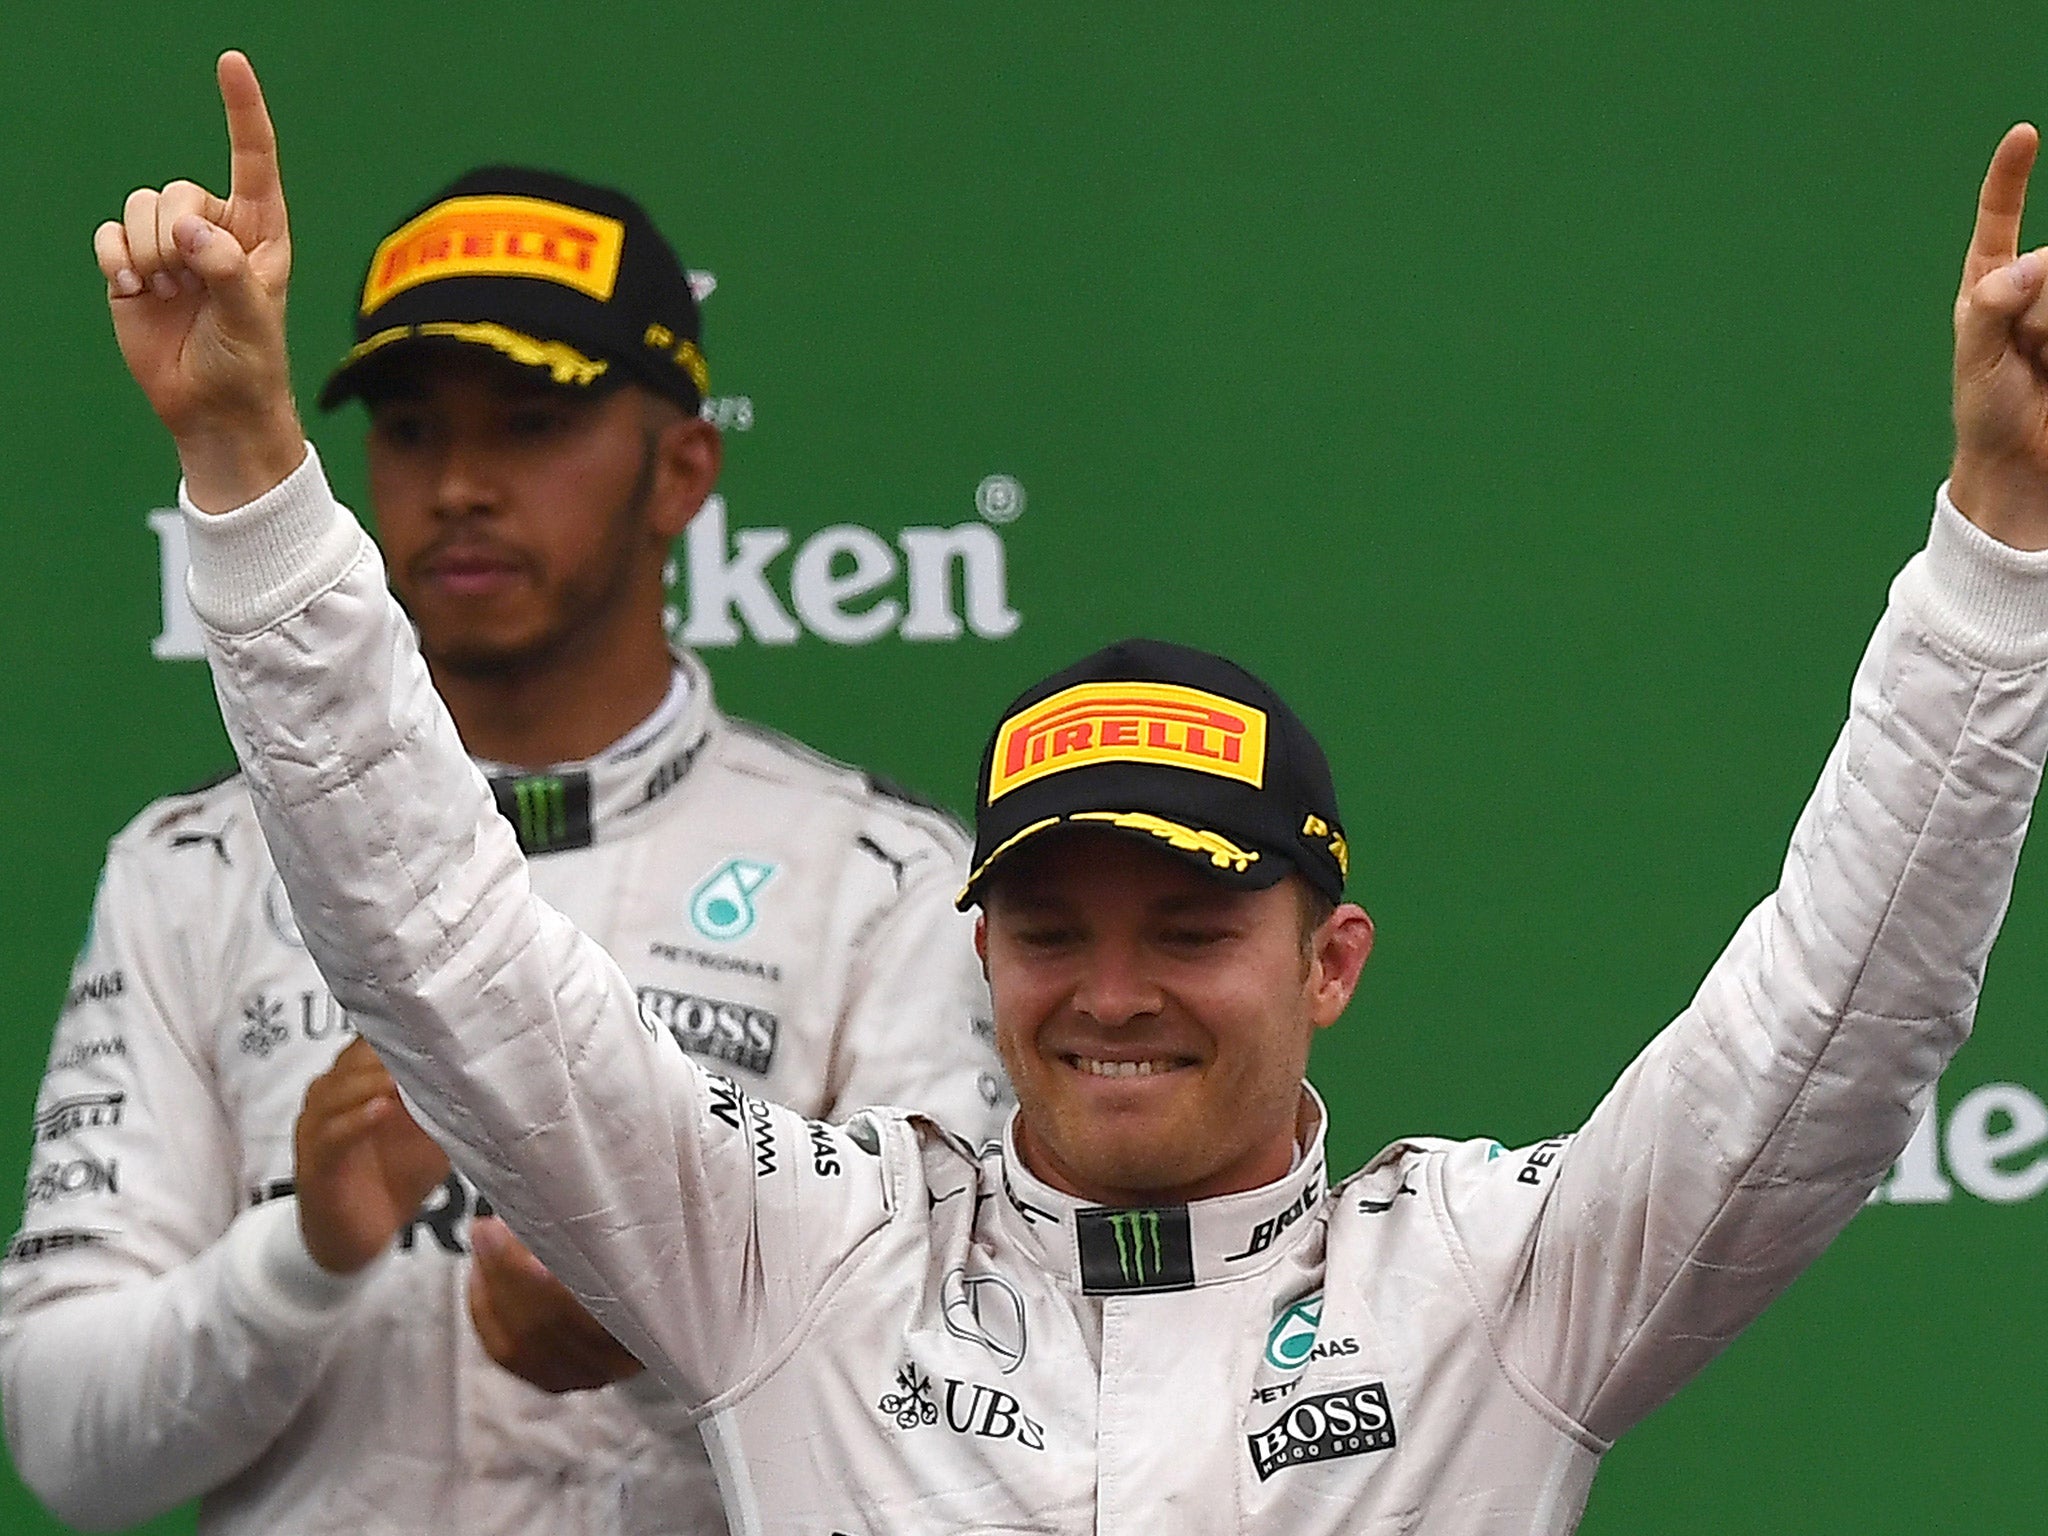 Lewis Hamilton saw his lead cut to just two points after Nico Rosberg won the Italian Grand Prix